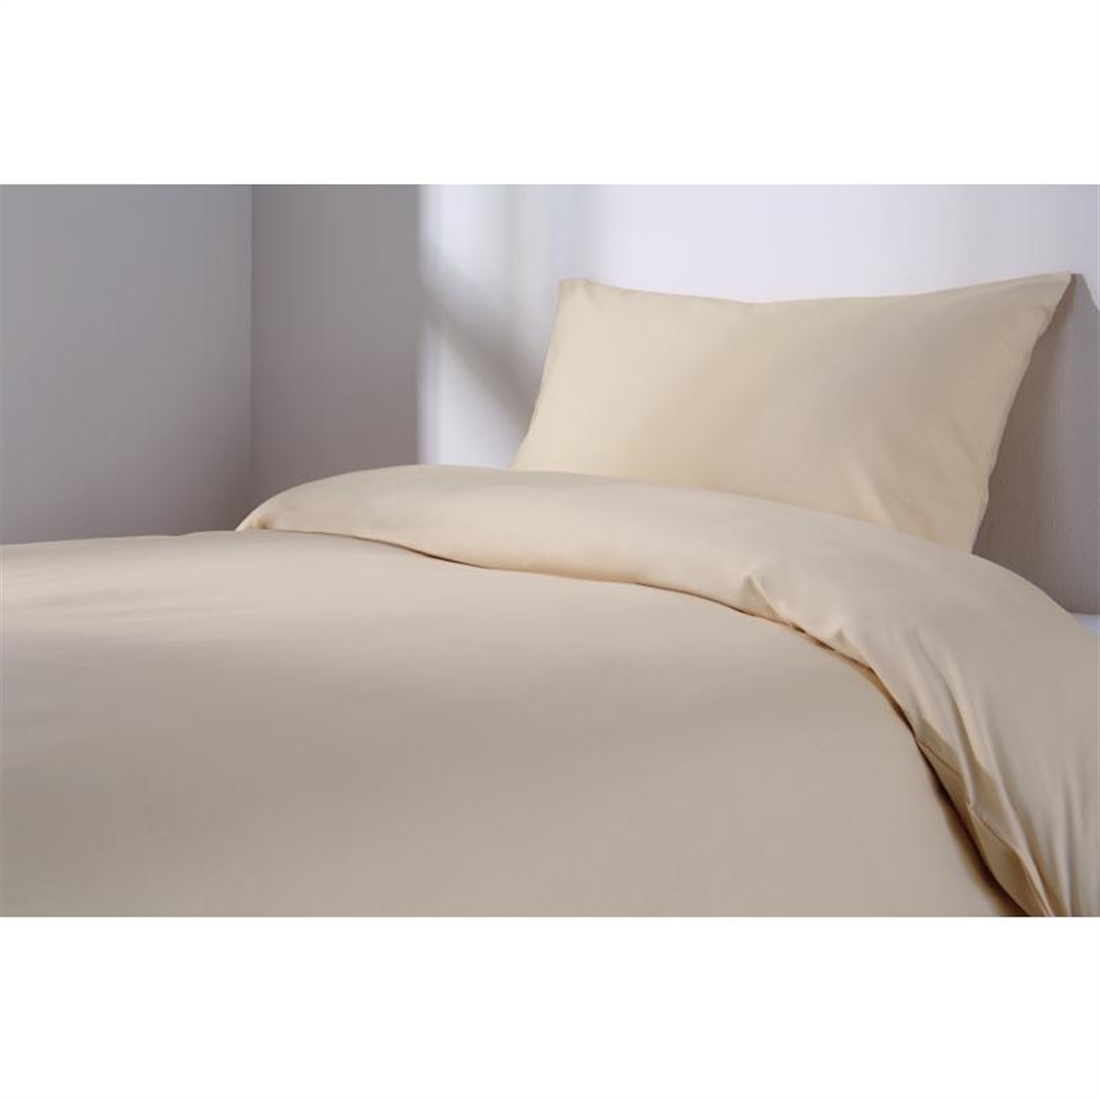 Mitre Essentials Spectrum Fitted Sheet Oatmeal Super King